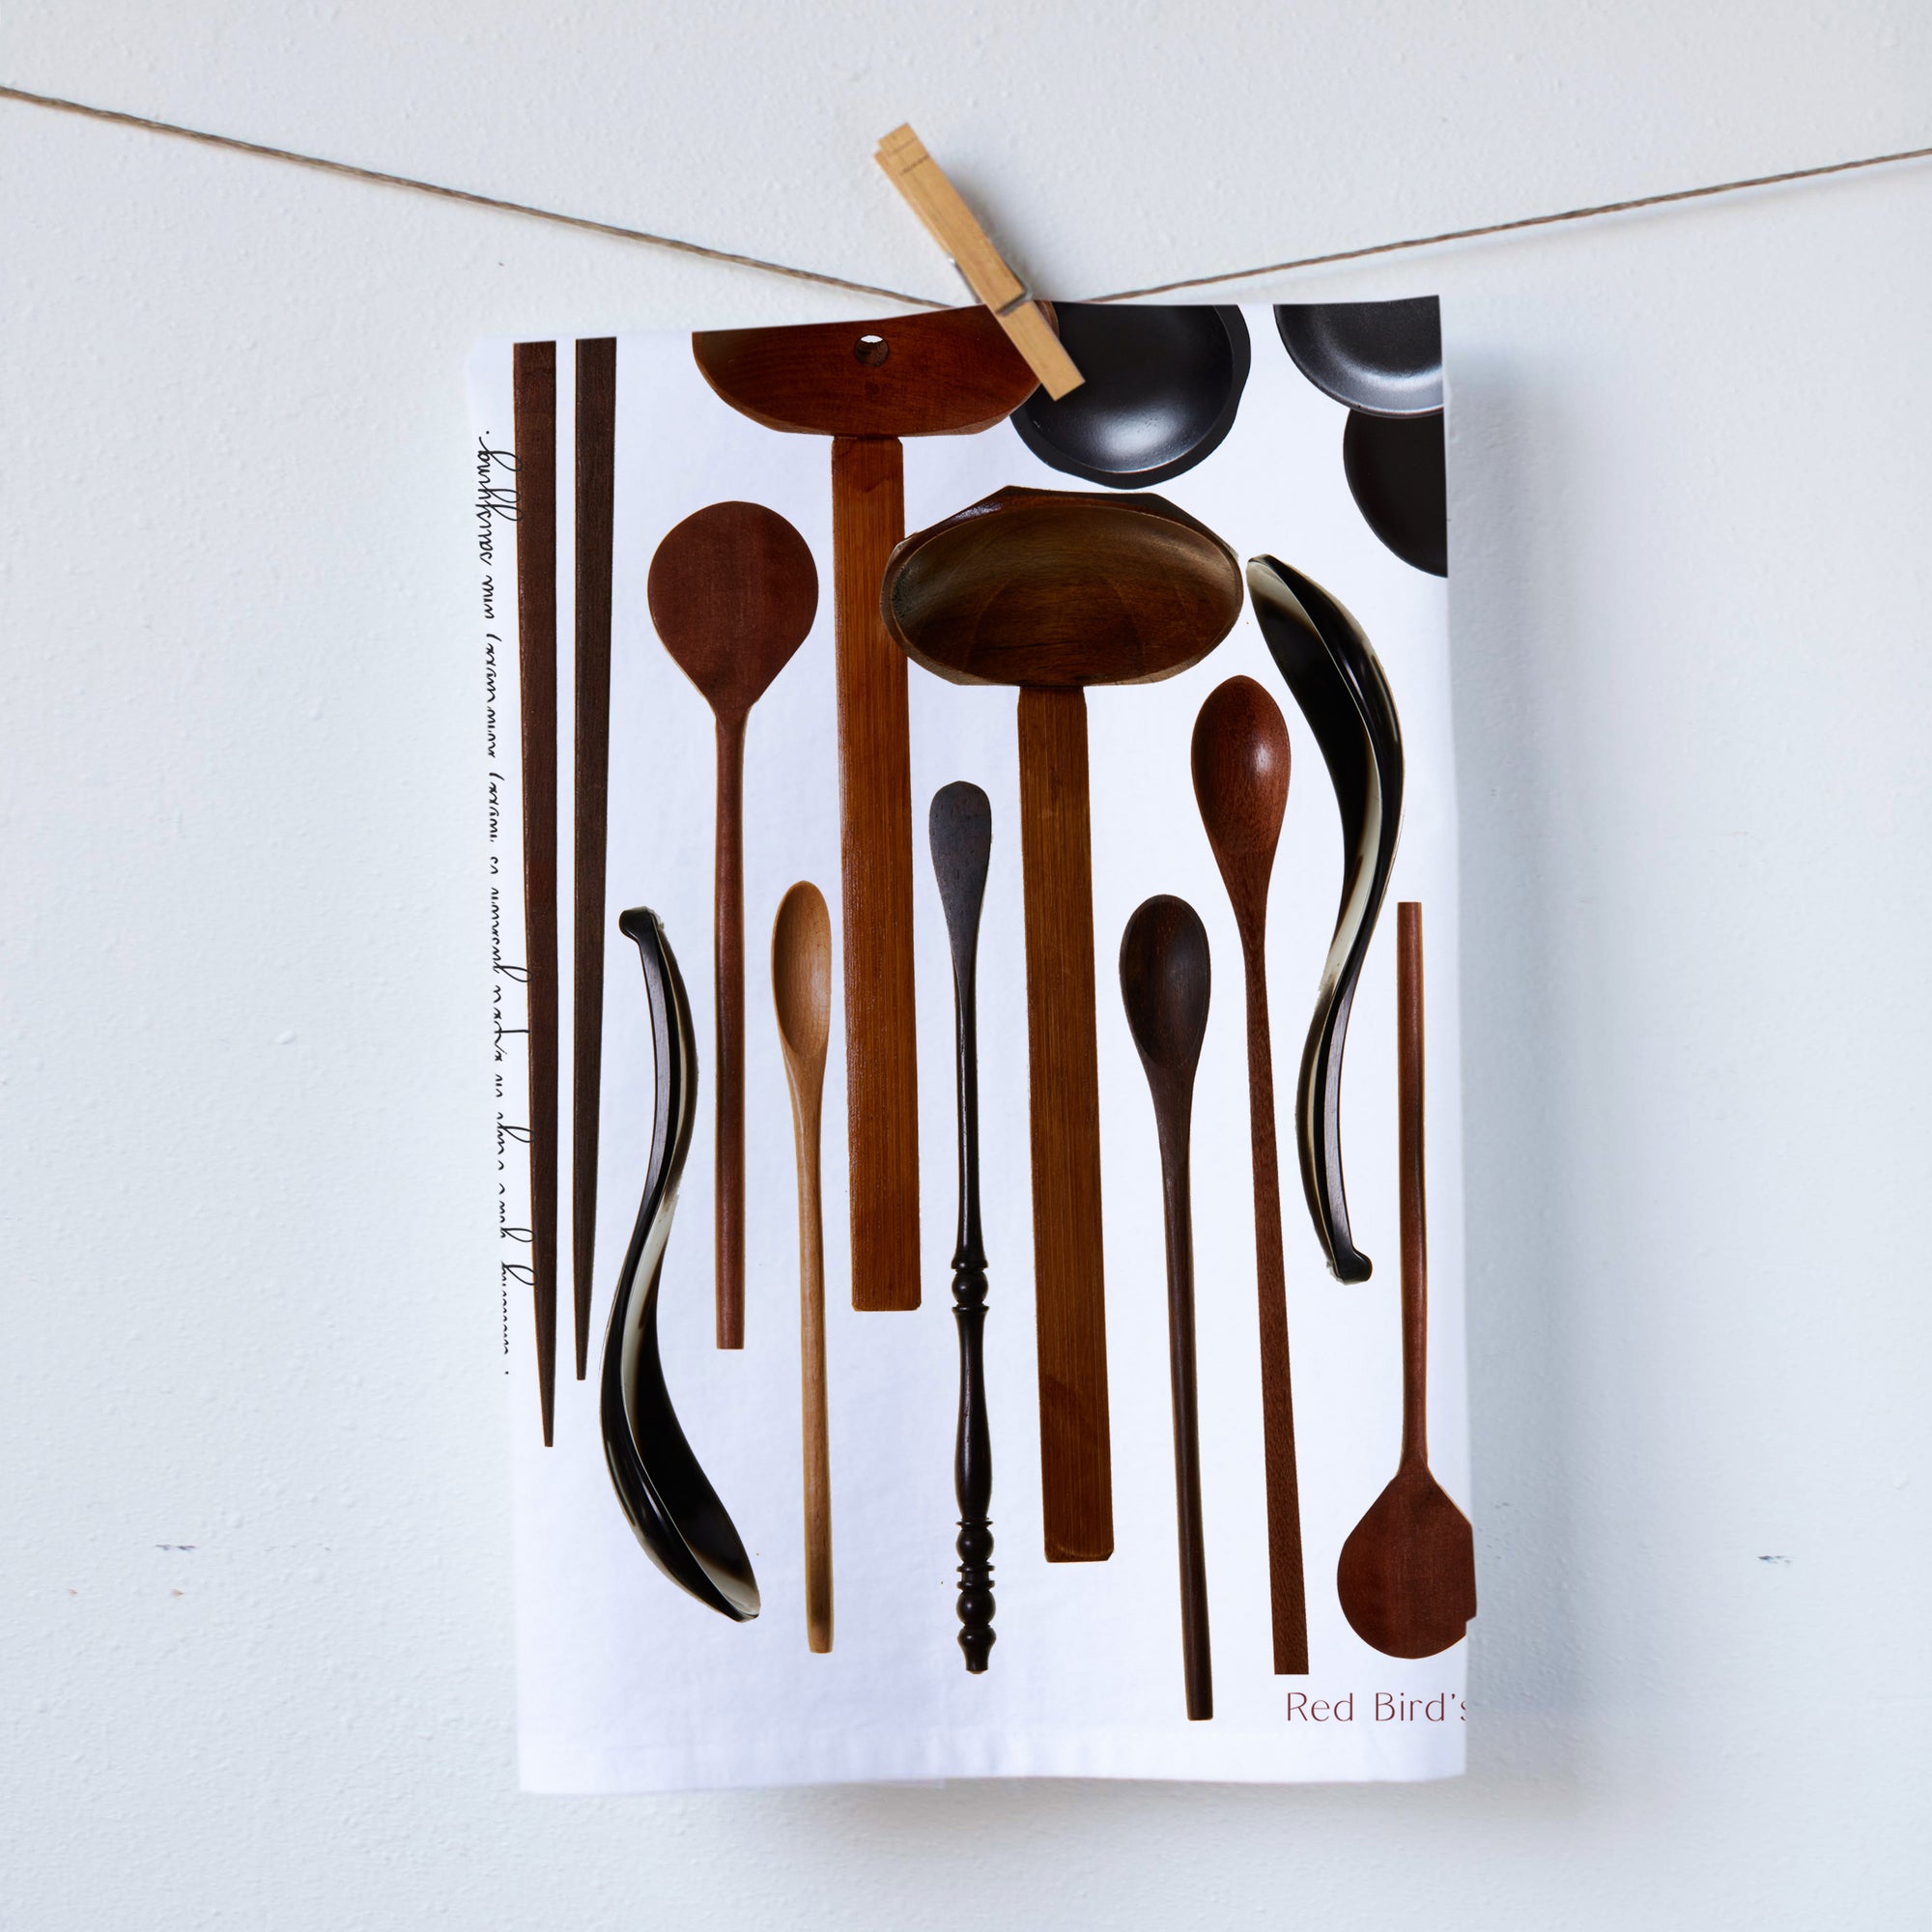 Variety of wooden spoon kitchen towel. From dark wood to light wood spoons. Many different shapes from ladles to serving spoons. beautiful vibrant colors great to add character to the kitchen. Photography by Pauline Stevens. Hostess Gift. 19"x 28"  (6081240563911)